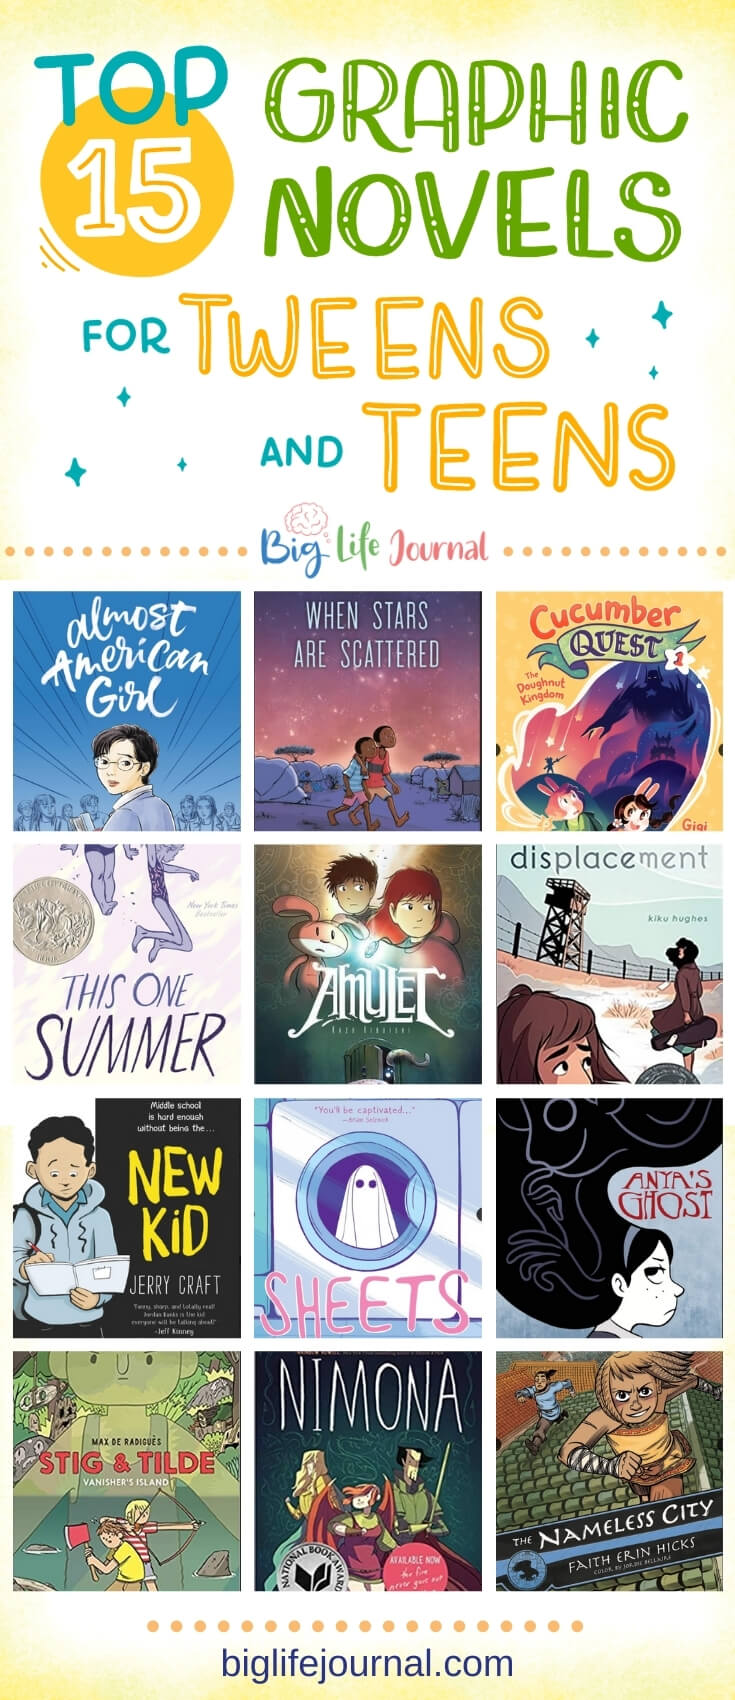 Top 15 Graphic Novels for Tweens and Teens